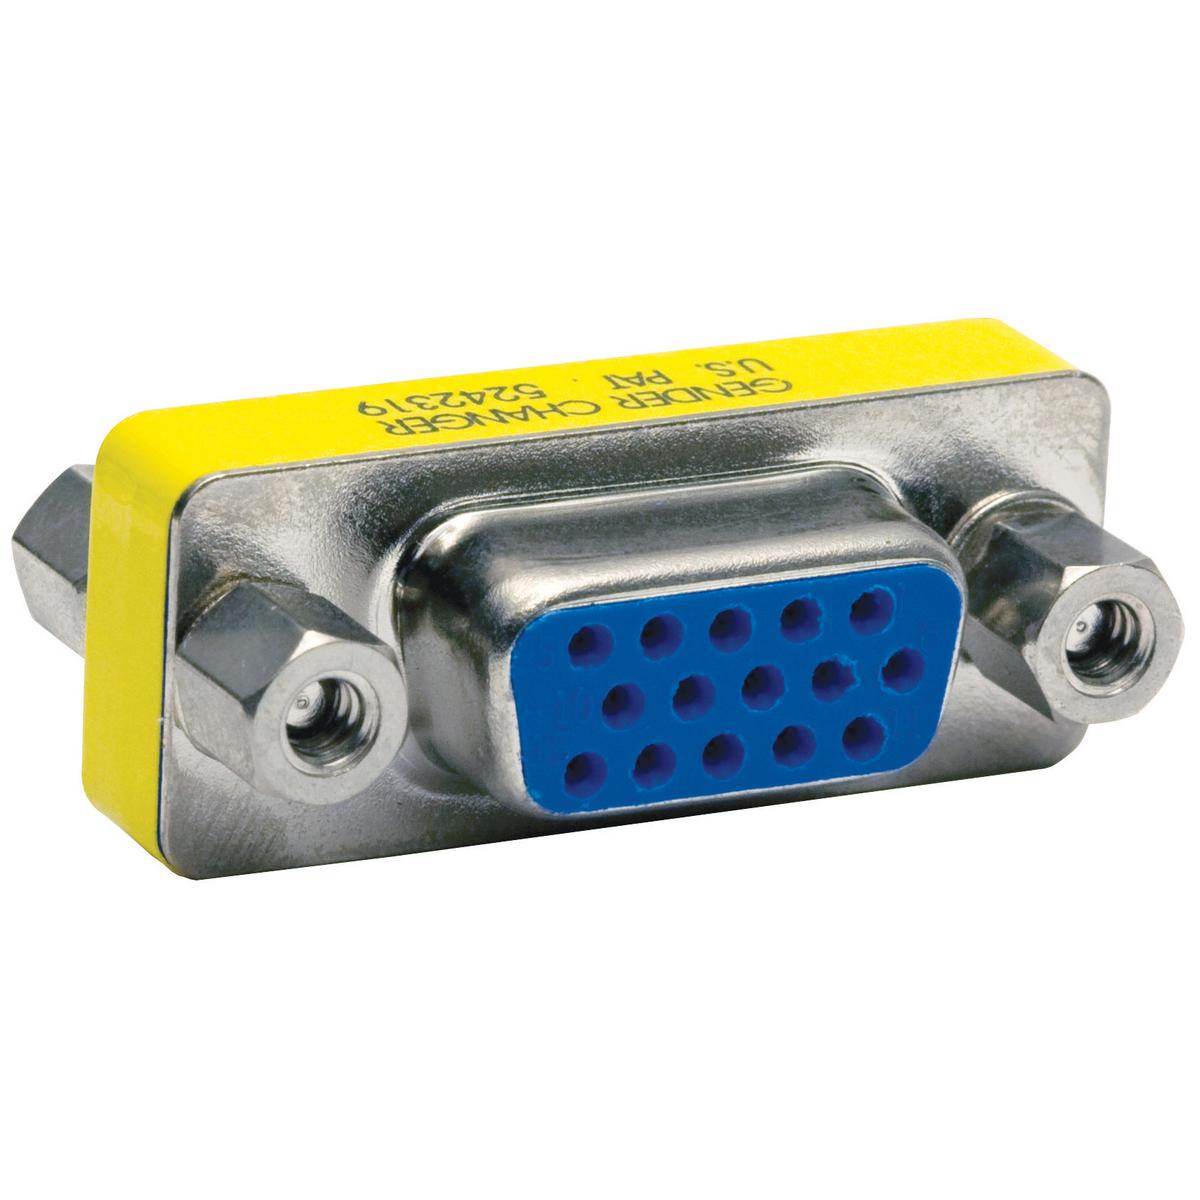 Hubbell 15GC10 Audio/Video Connector, D-Sub, 15-Pin, Gender Changer Bulk Connector, 10 Pack  ; Standard Product